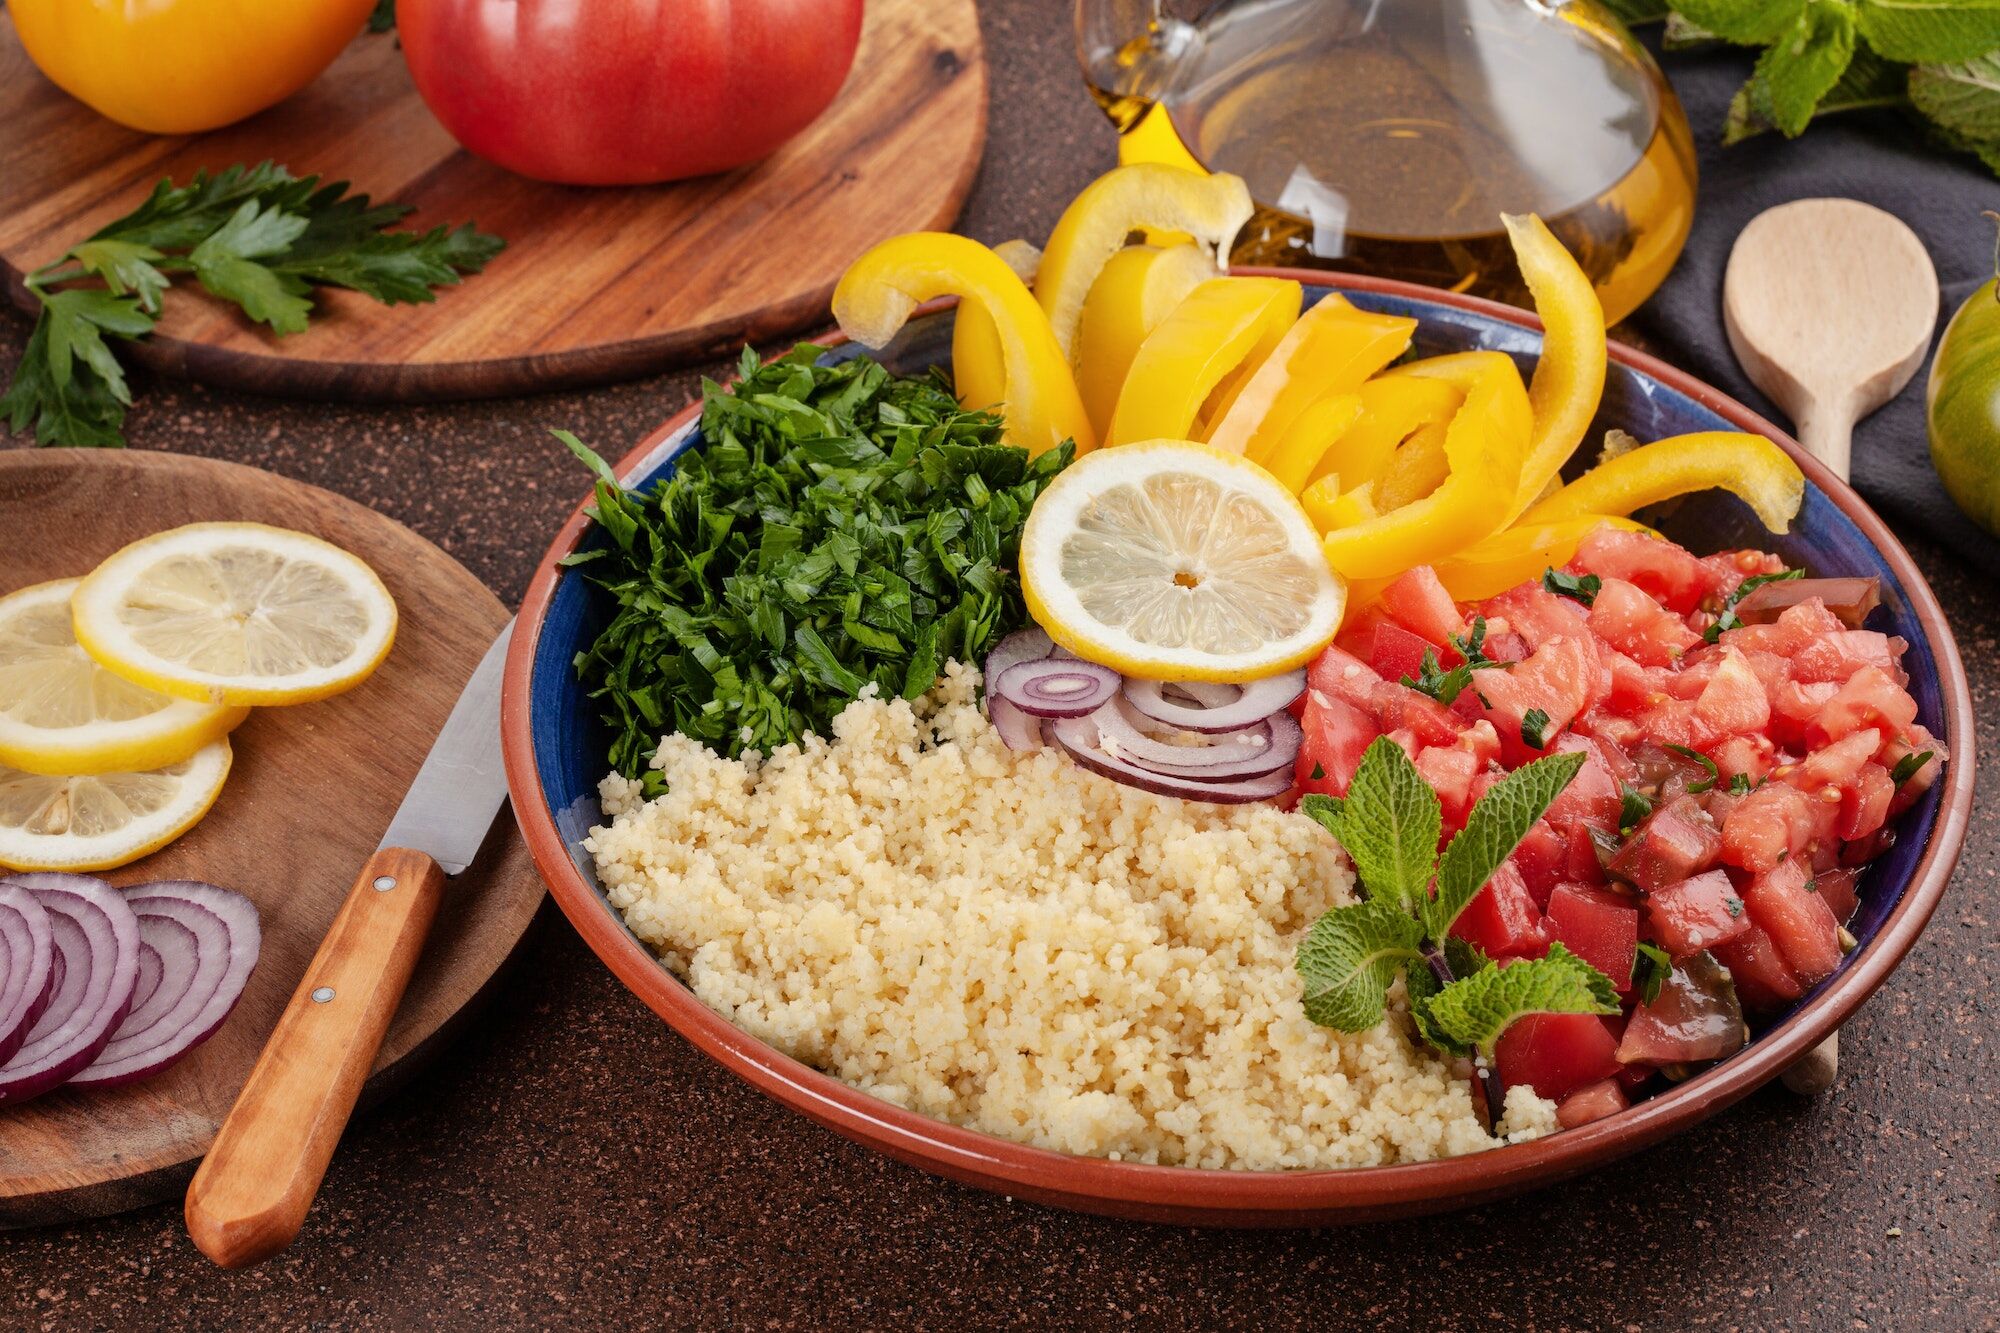 Fresh ingredients for salad with couscous. Healthy, vegeterian halal food concept